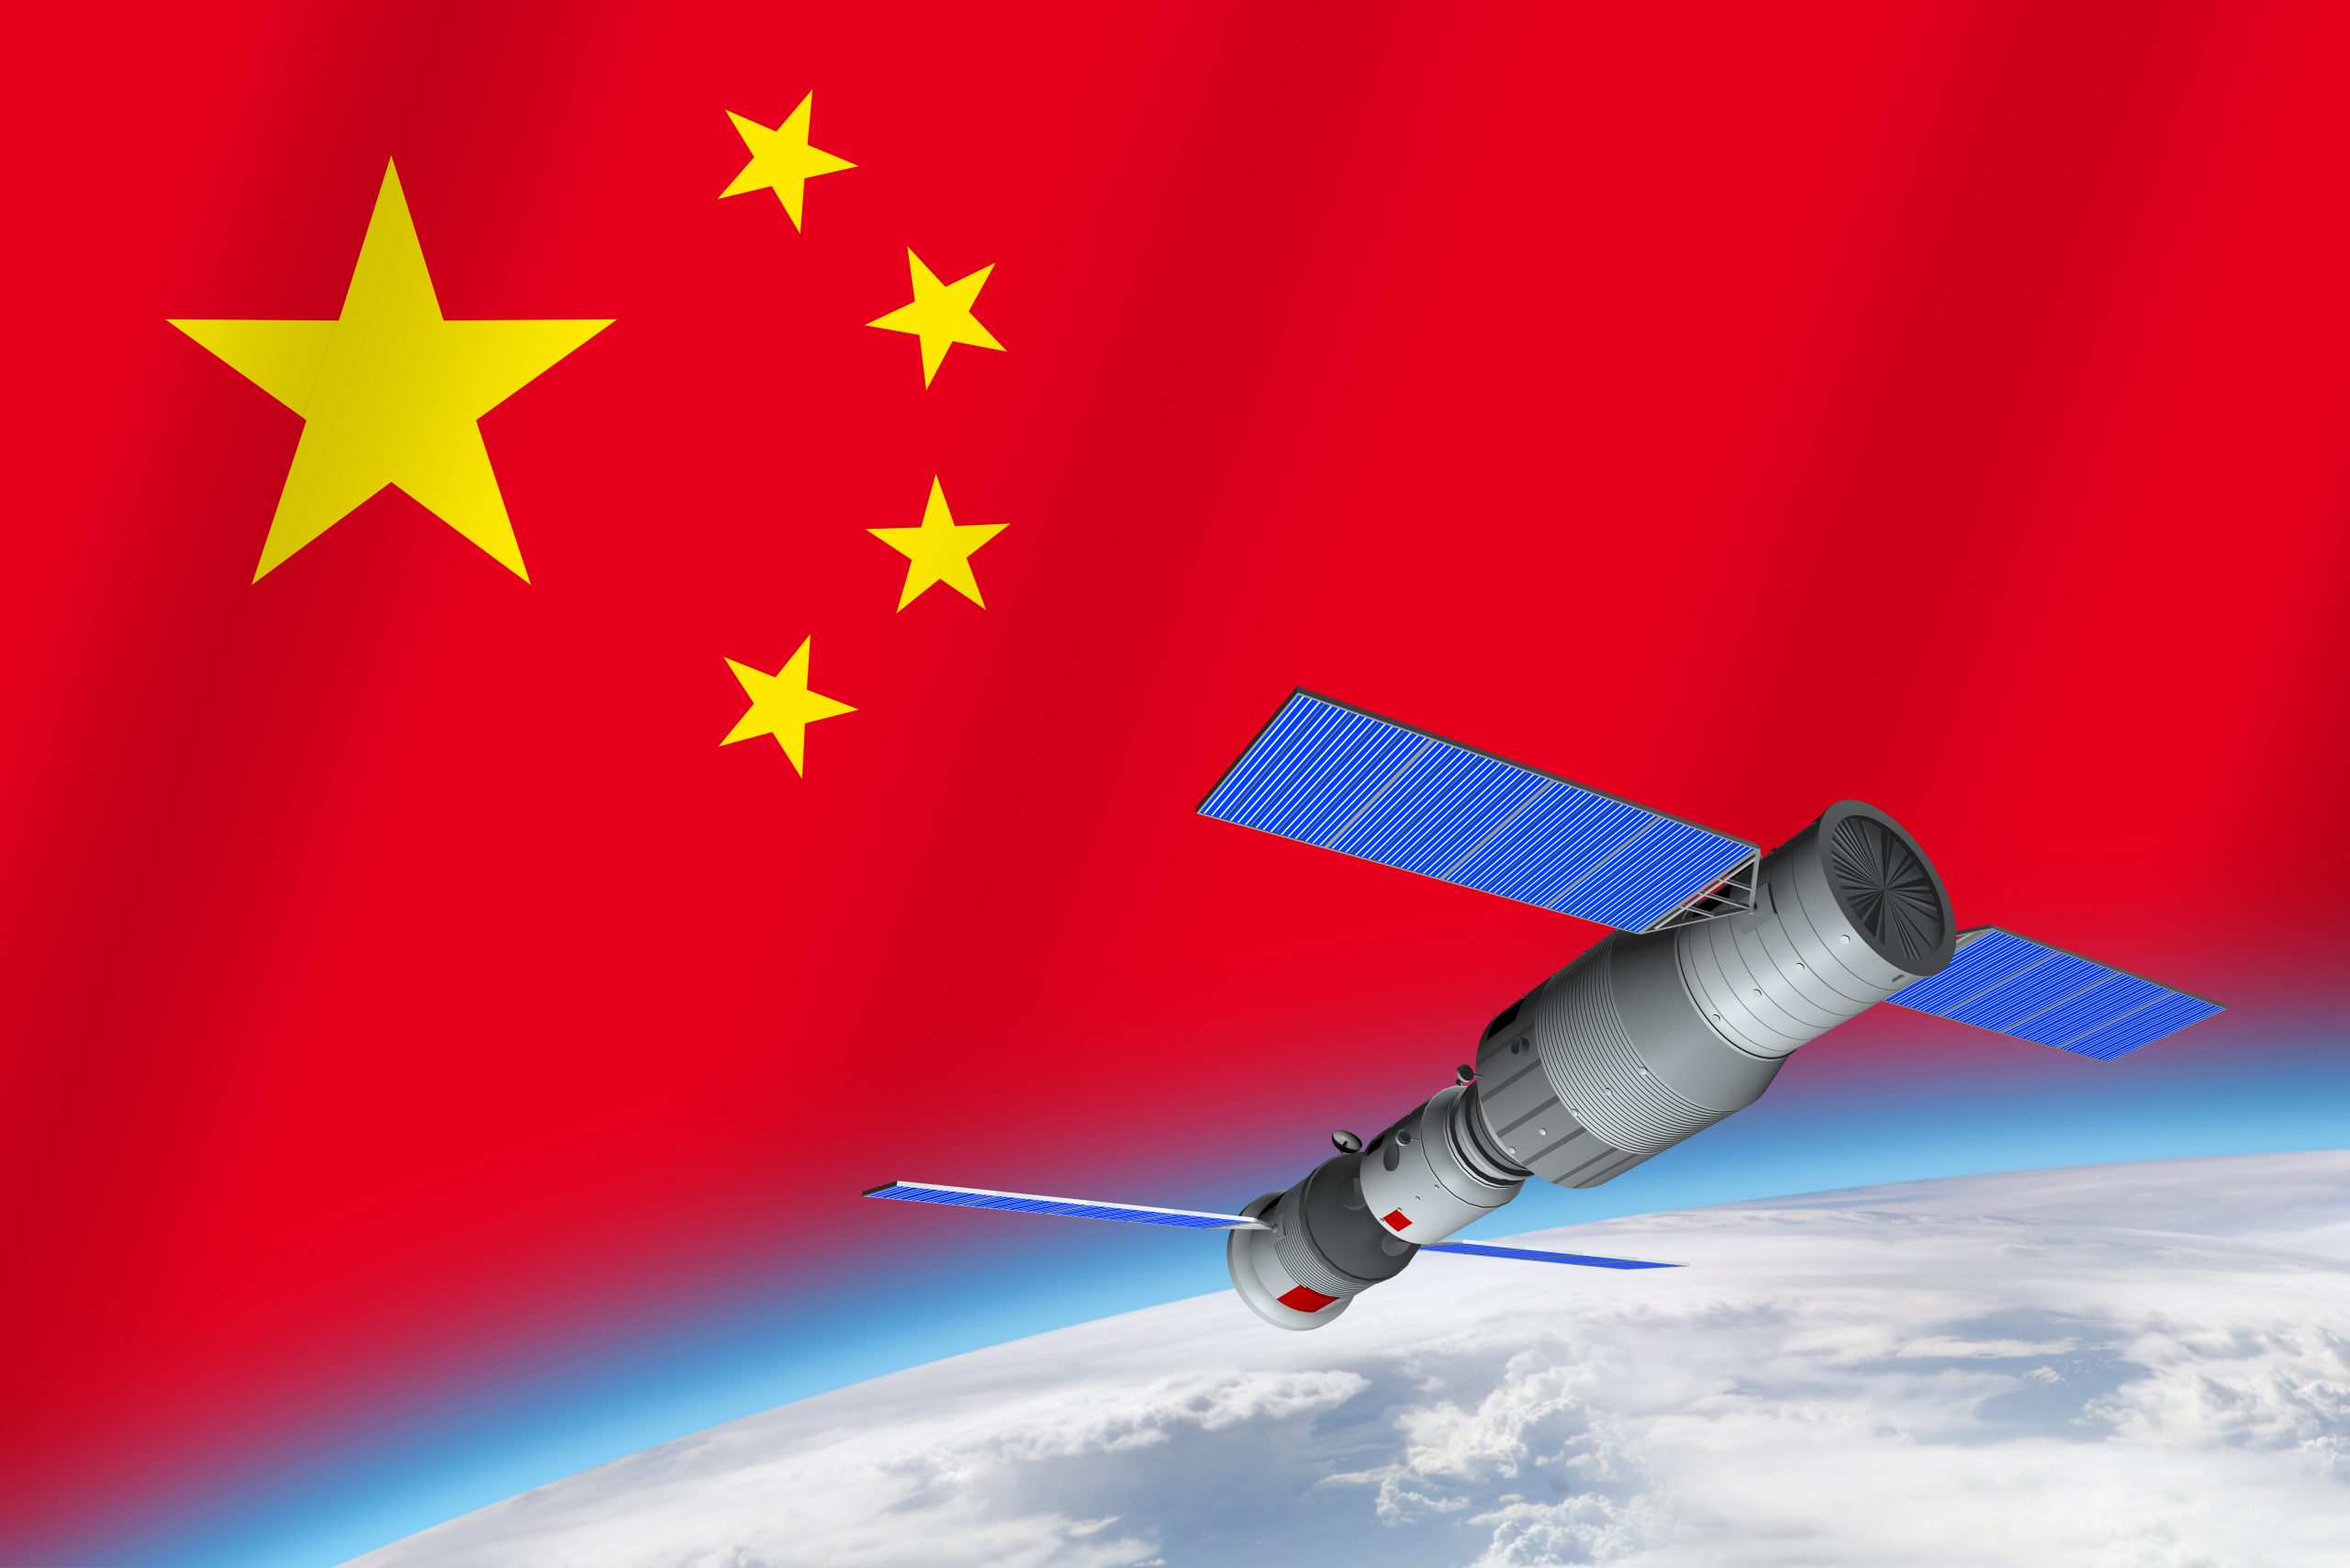 An illustration showing the Chinese flag, Chinese Space station and Earth. Depositphotos.